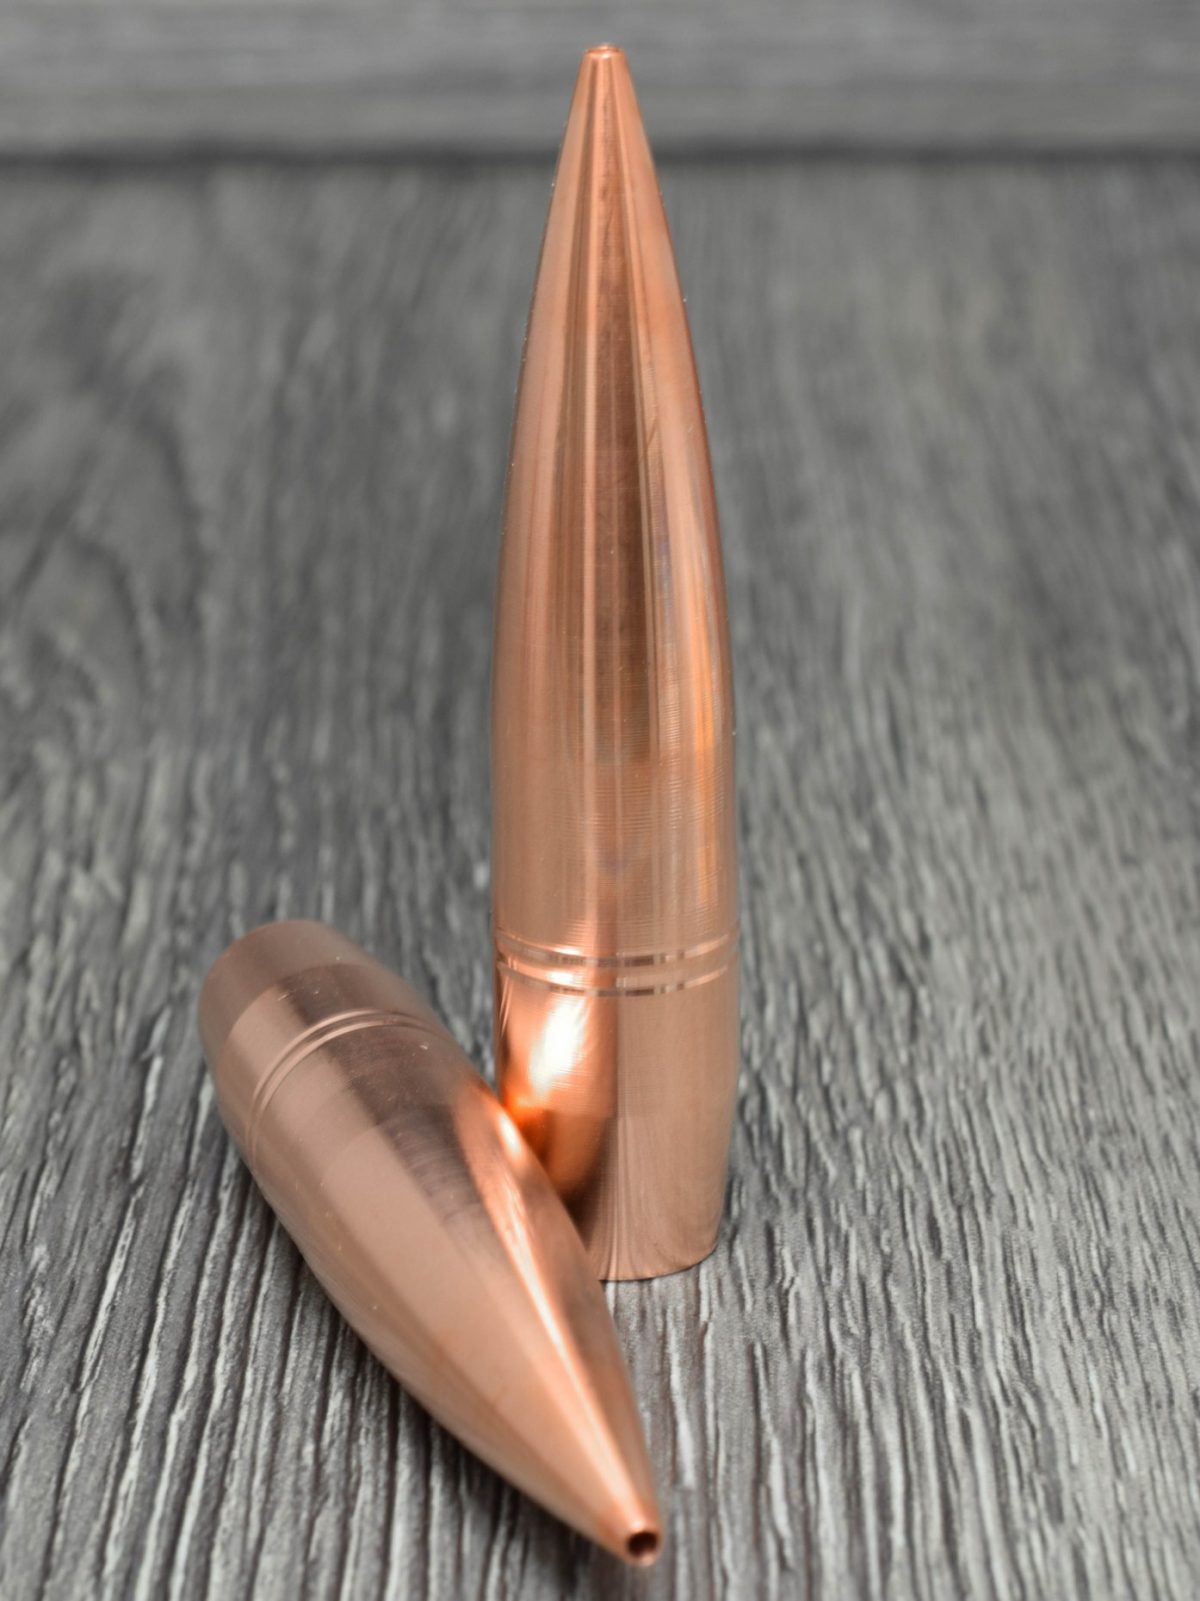 This SINGLE FEED bullet was designed for single shot loading 50BMG rifles. Our MTH line is machined out of lead free solid copper bar stock on a CNC lathe. These are a high BC